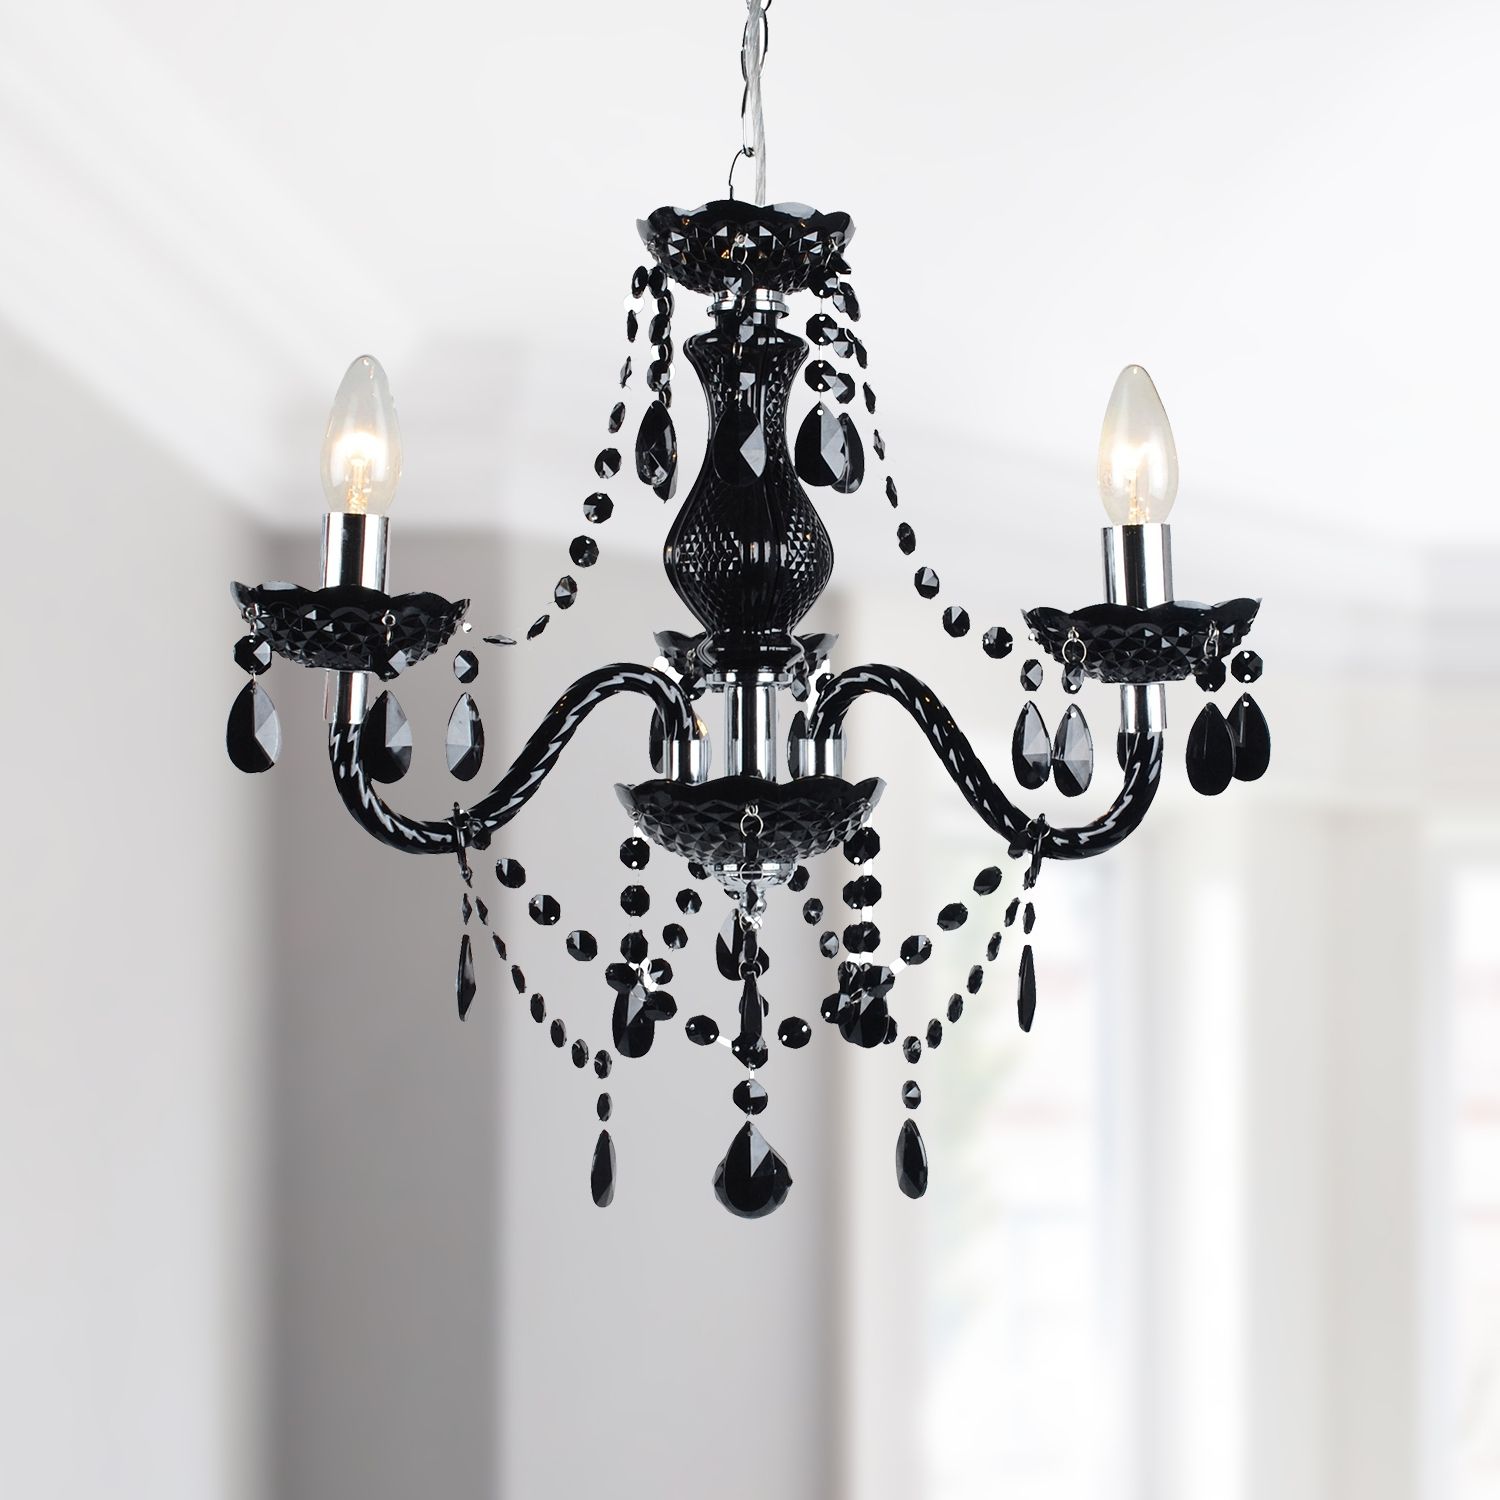 Modern Classic Black & Chrome Marie Therese 3 Light For Most Current 3 Light Pendant Chandeliers (View 15 of 15)